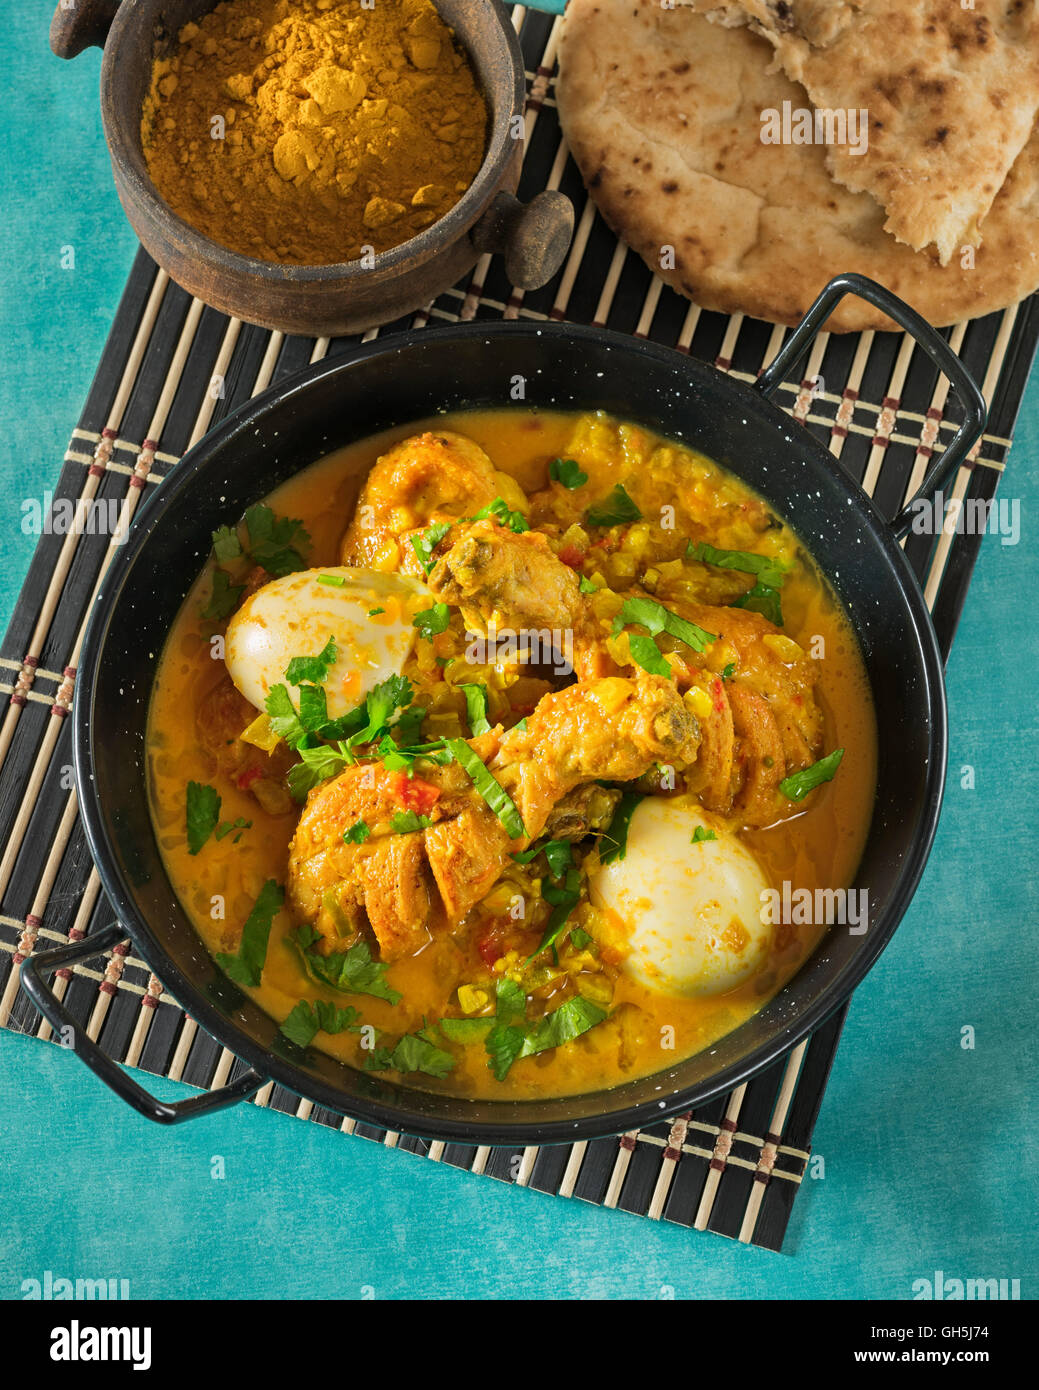 Kuku paka. East African coconut chicken curry Foto Stock